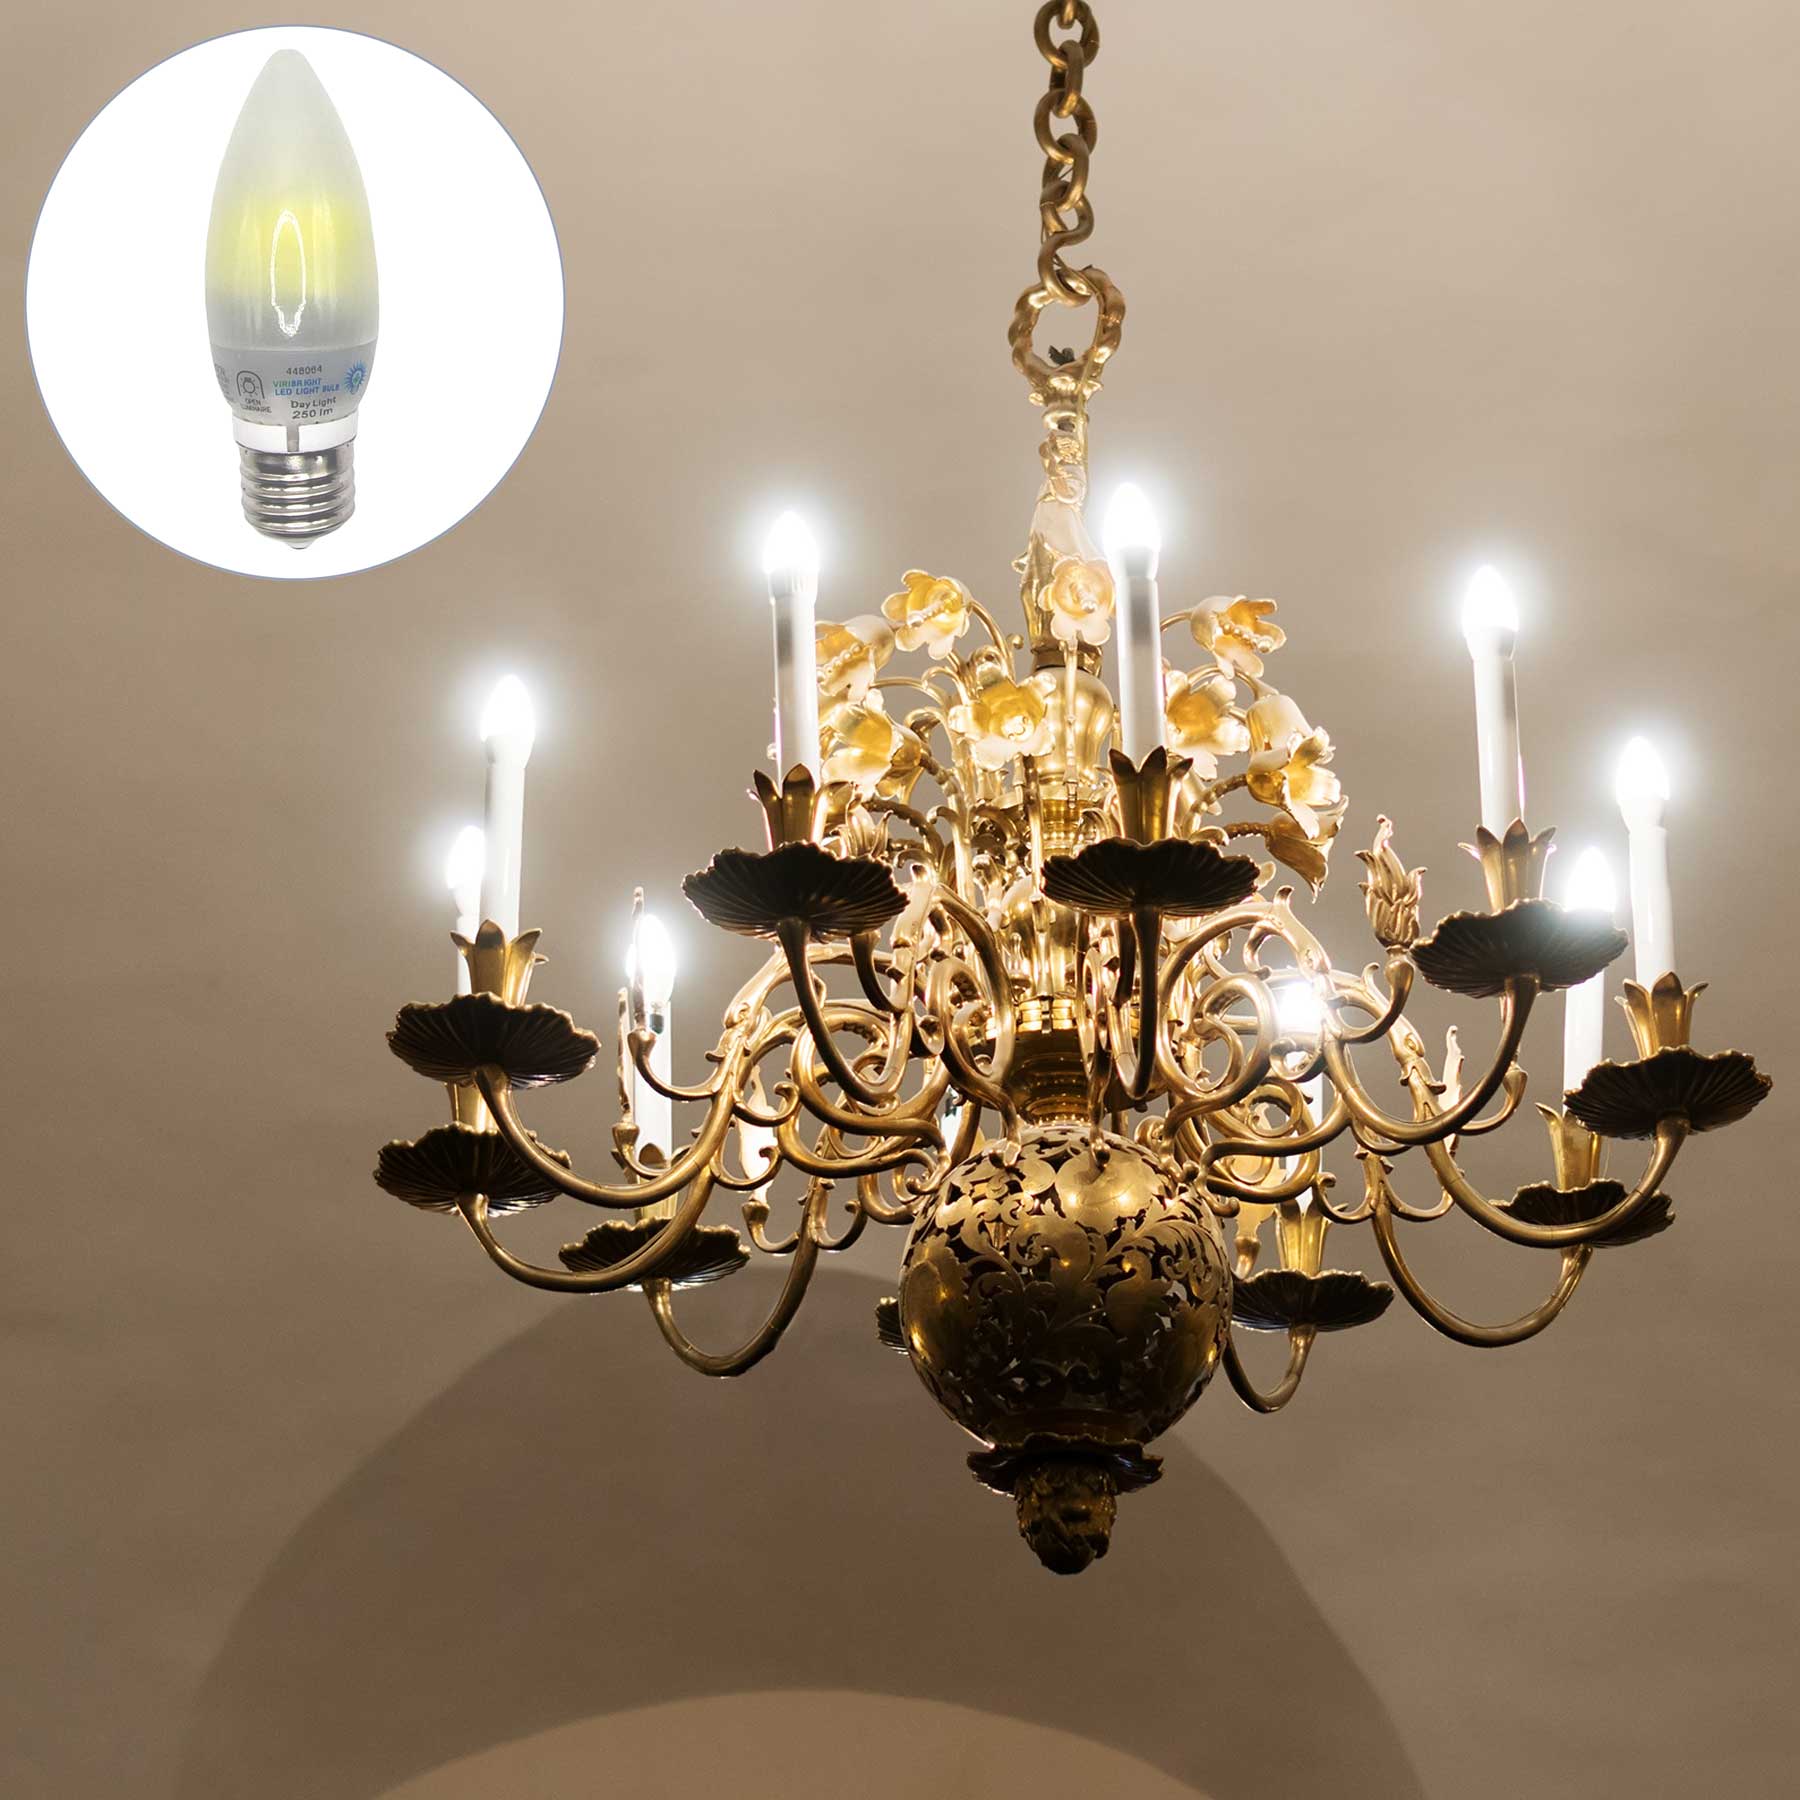 Chandelier with Frosted LED Light Bulb